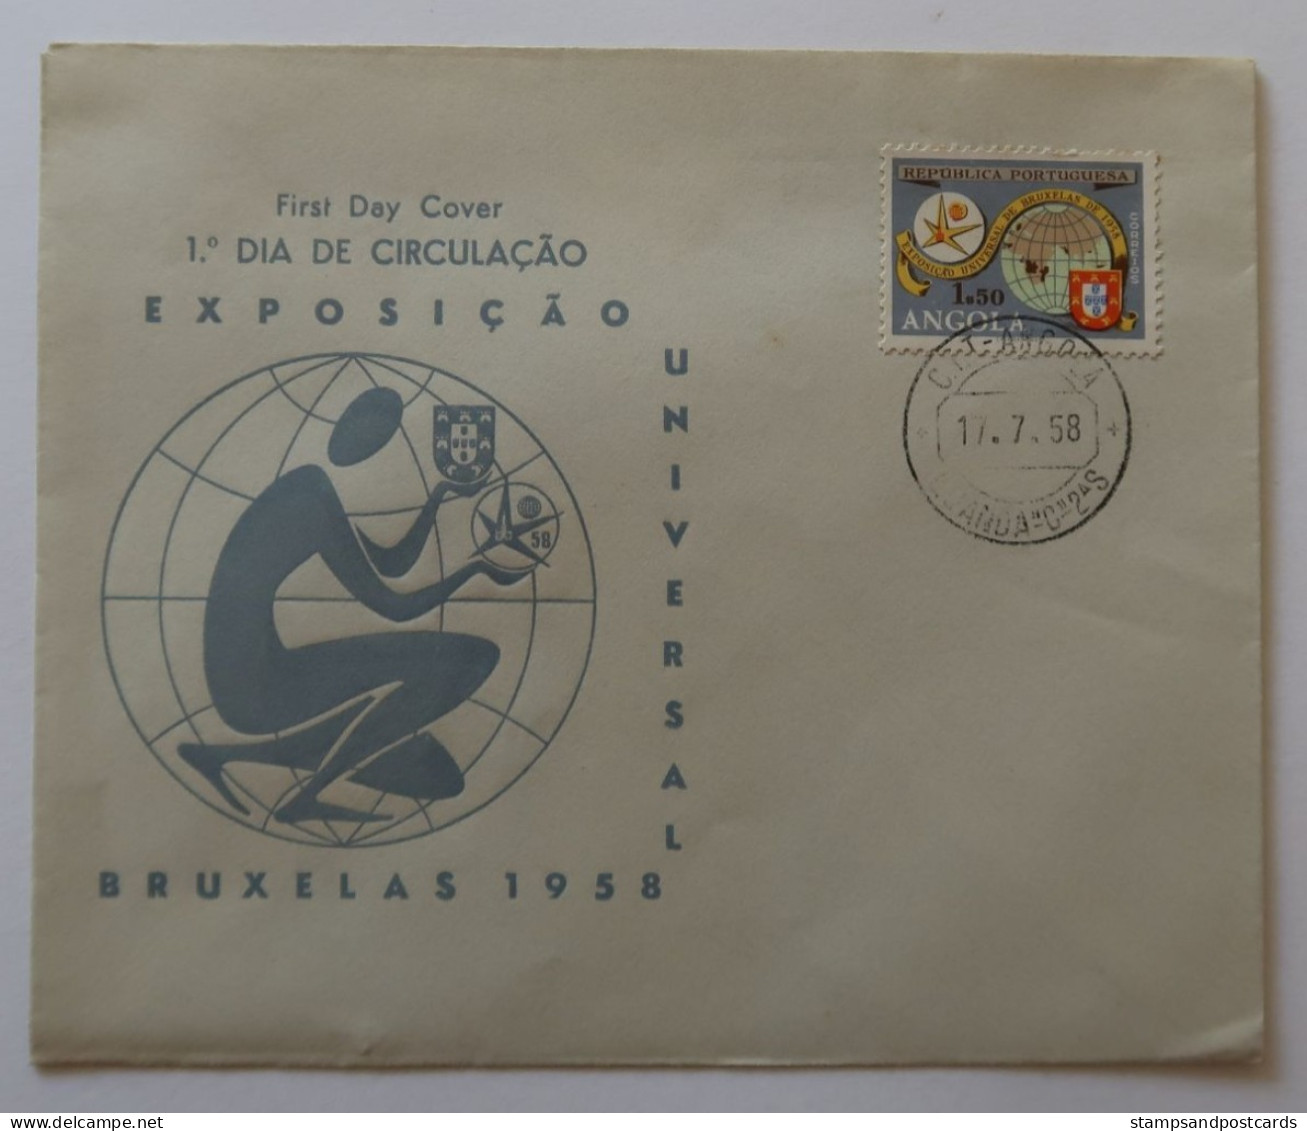 Angola Expo 1958 Bruxelles Brussels FDC - 1958 – Brussels (Belgium)